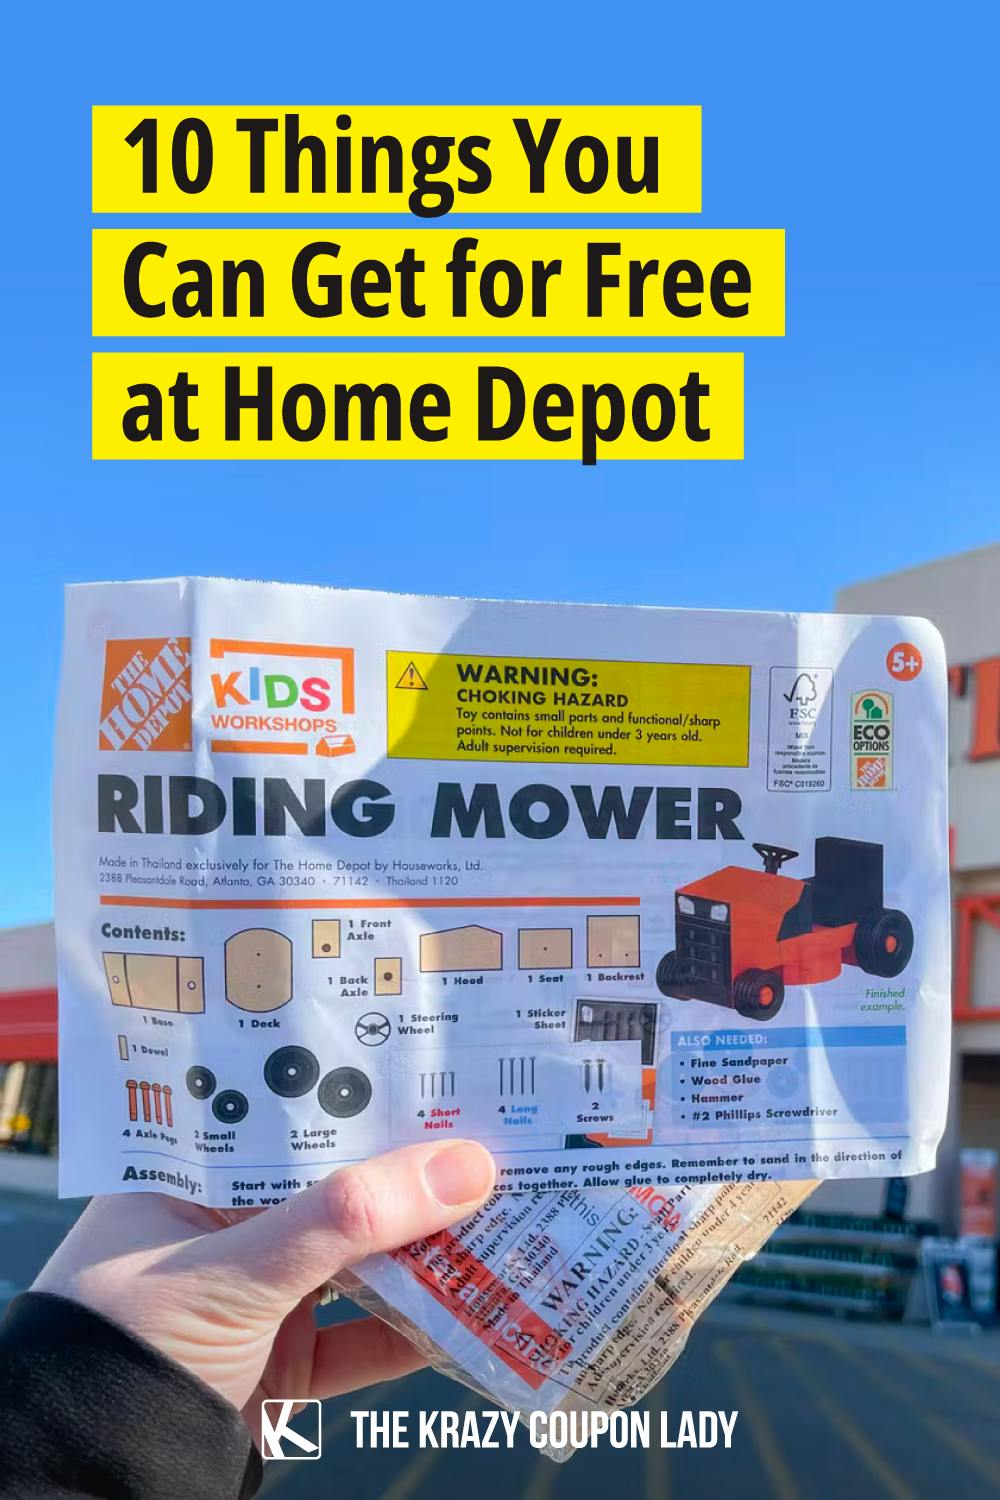 Free Home Depot Workshops and 10 Other Things You Can Get for Free